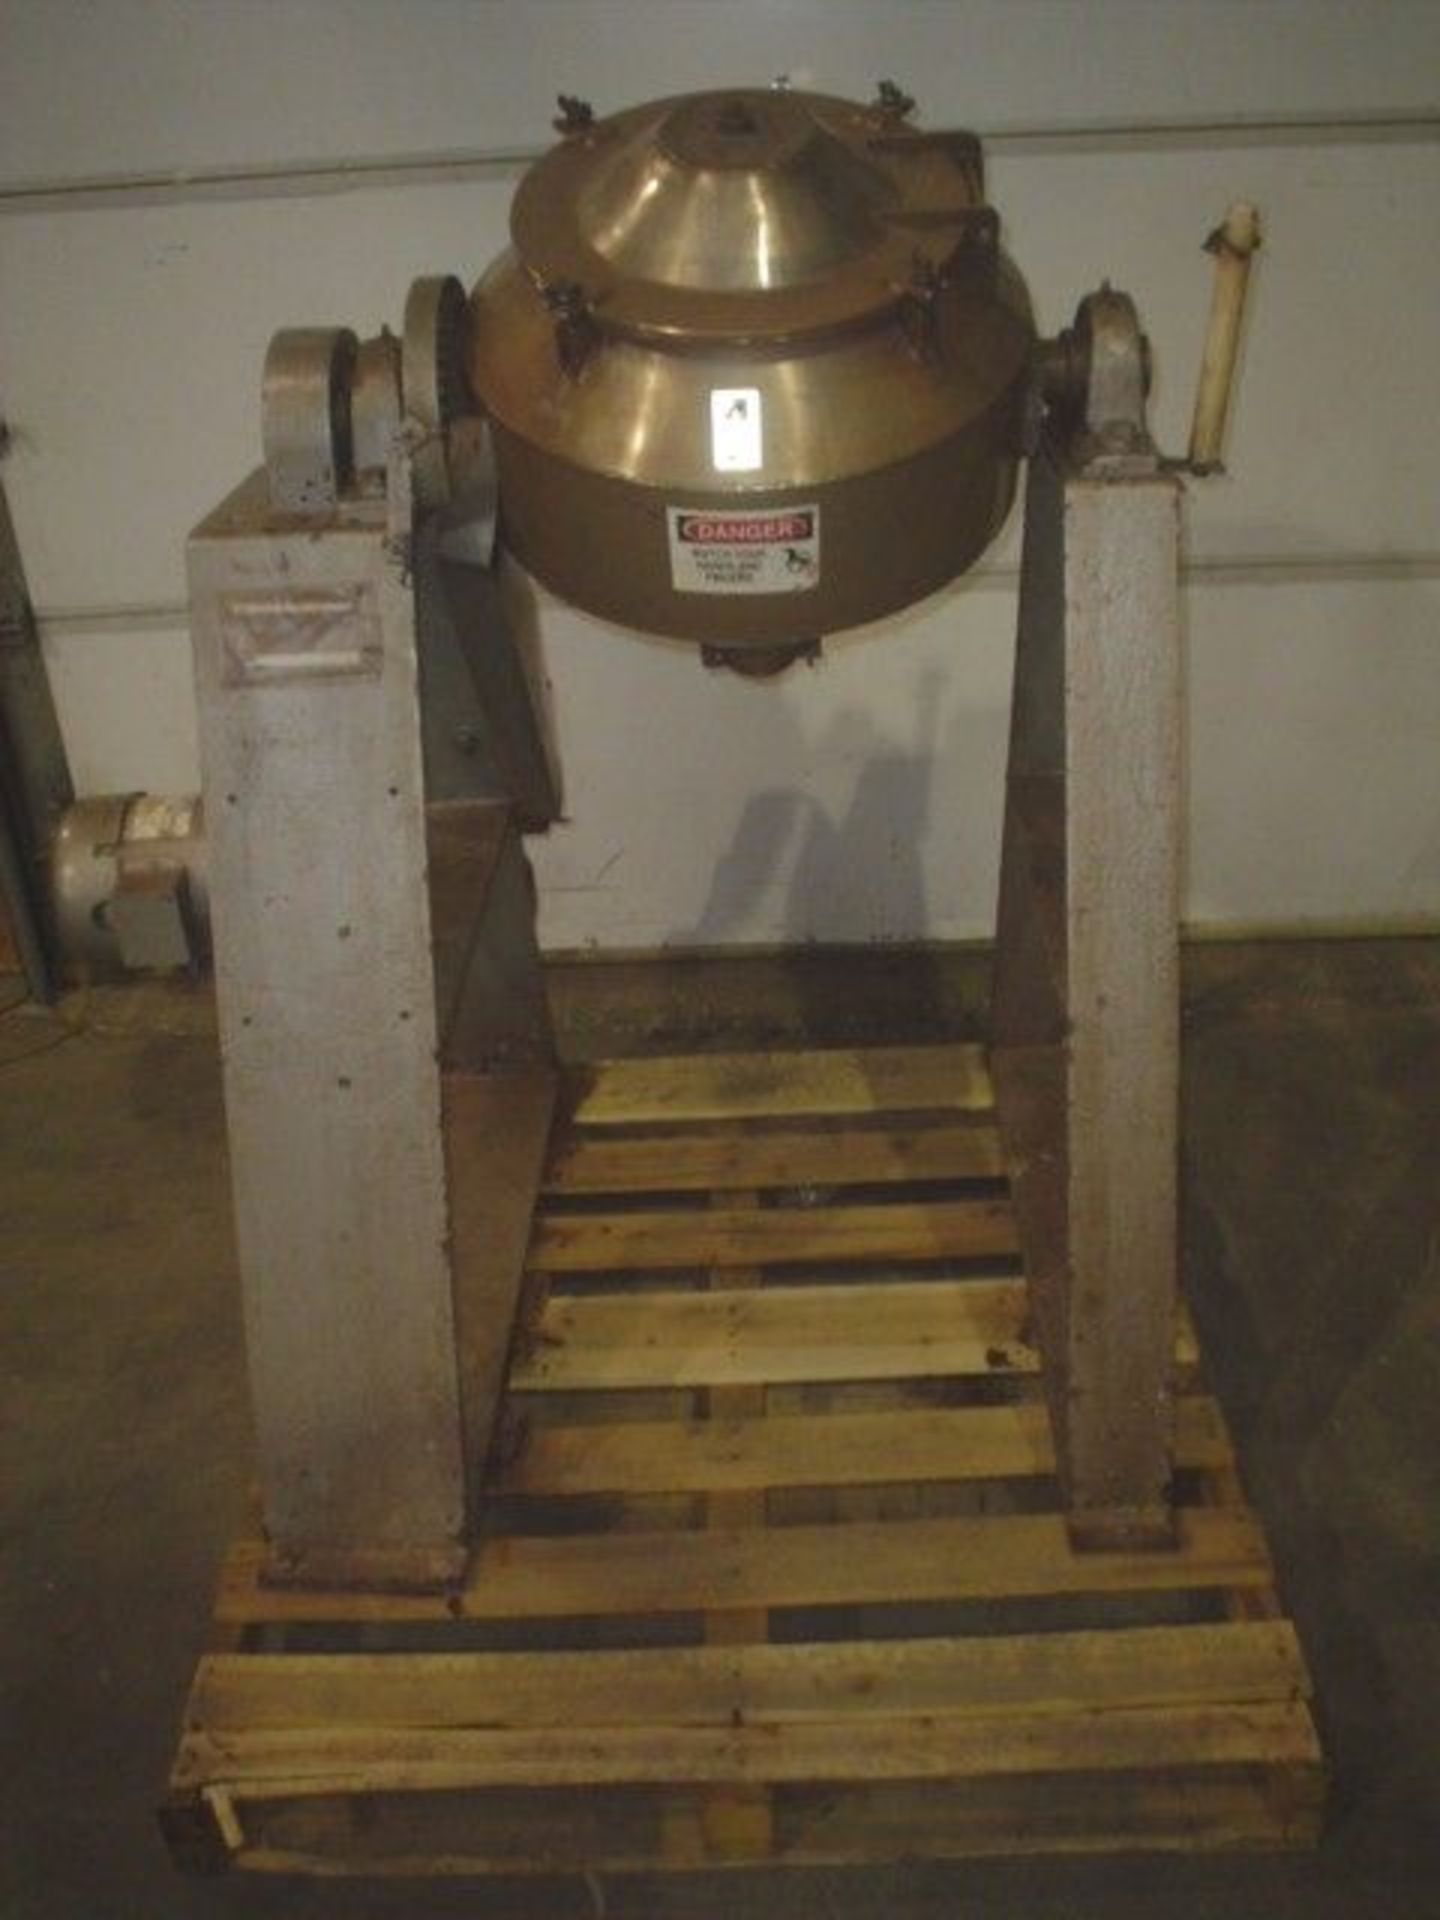 Used Approx 2 Cubic Foot Cone Blender with Intensifier Bar. Electrics: Main Motor ¾ HP with